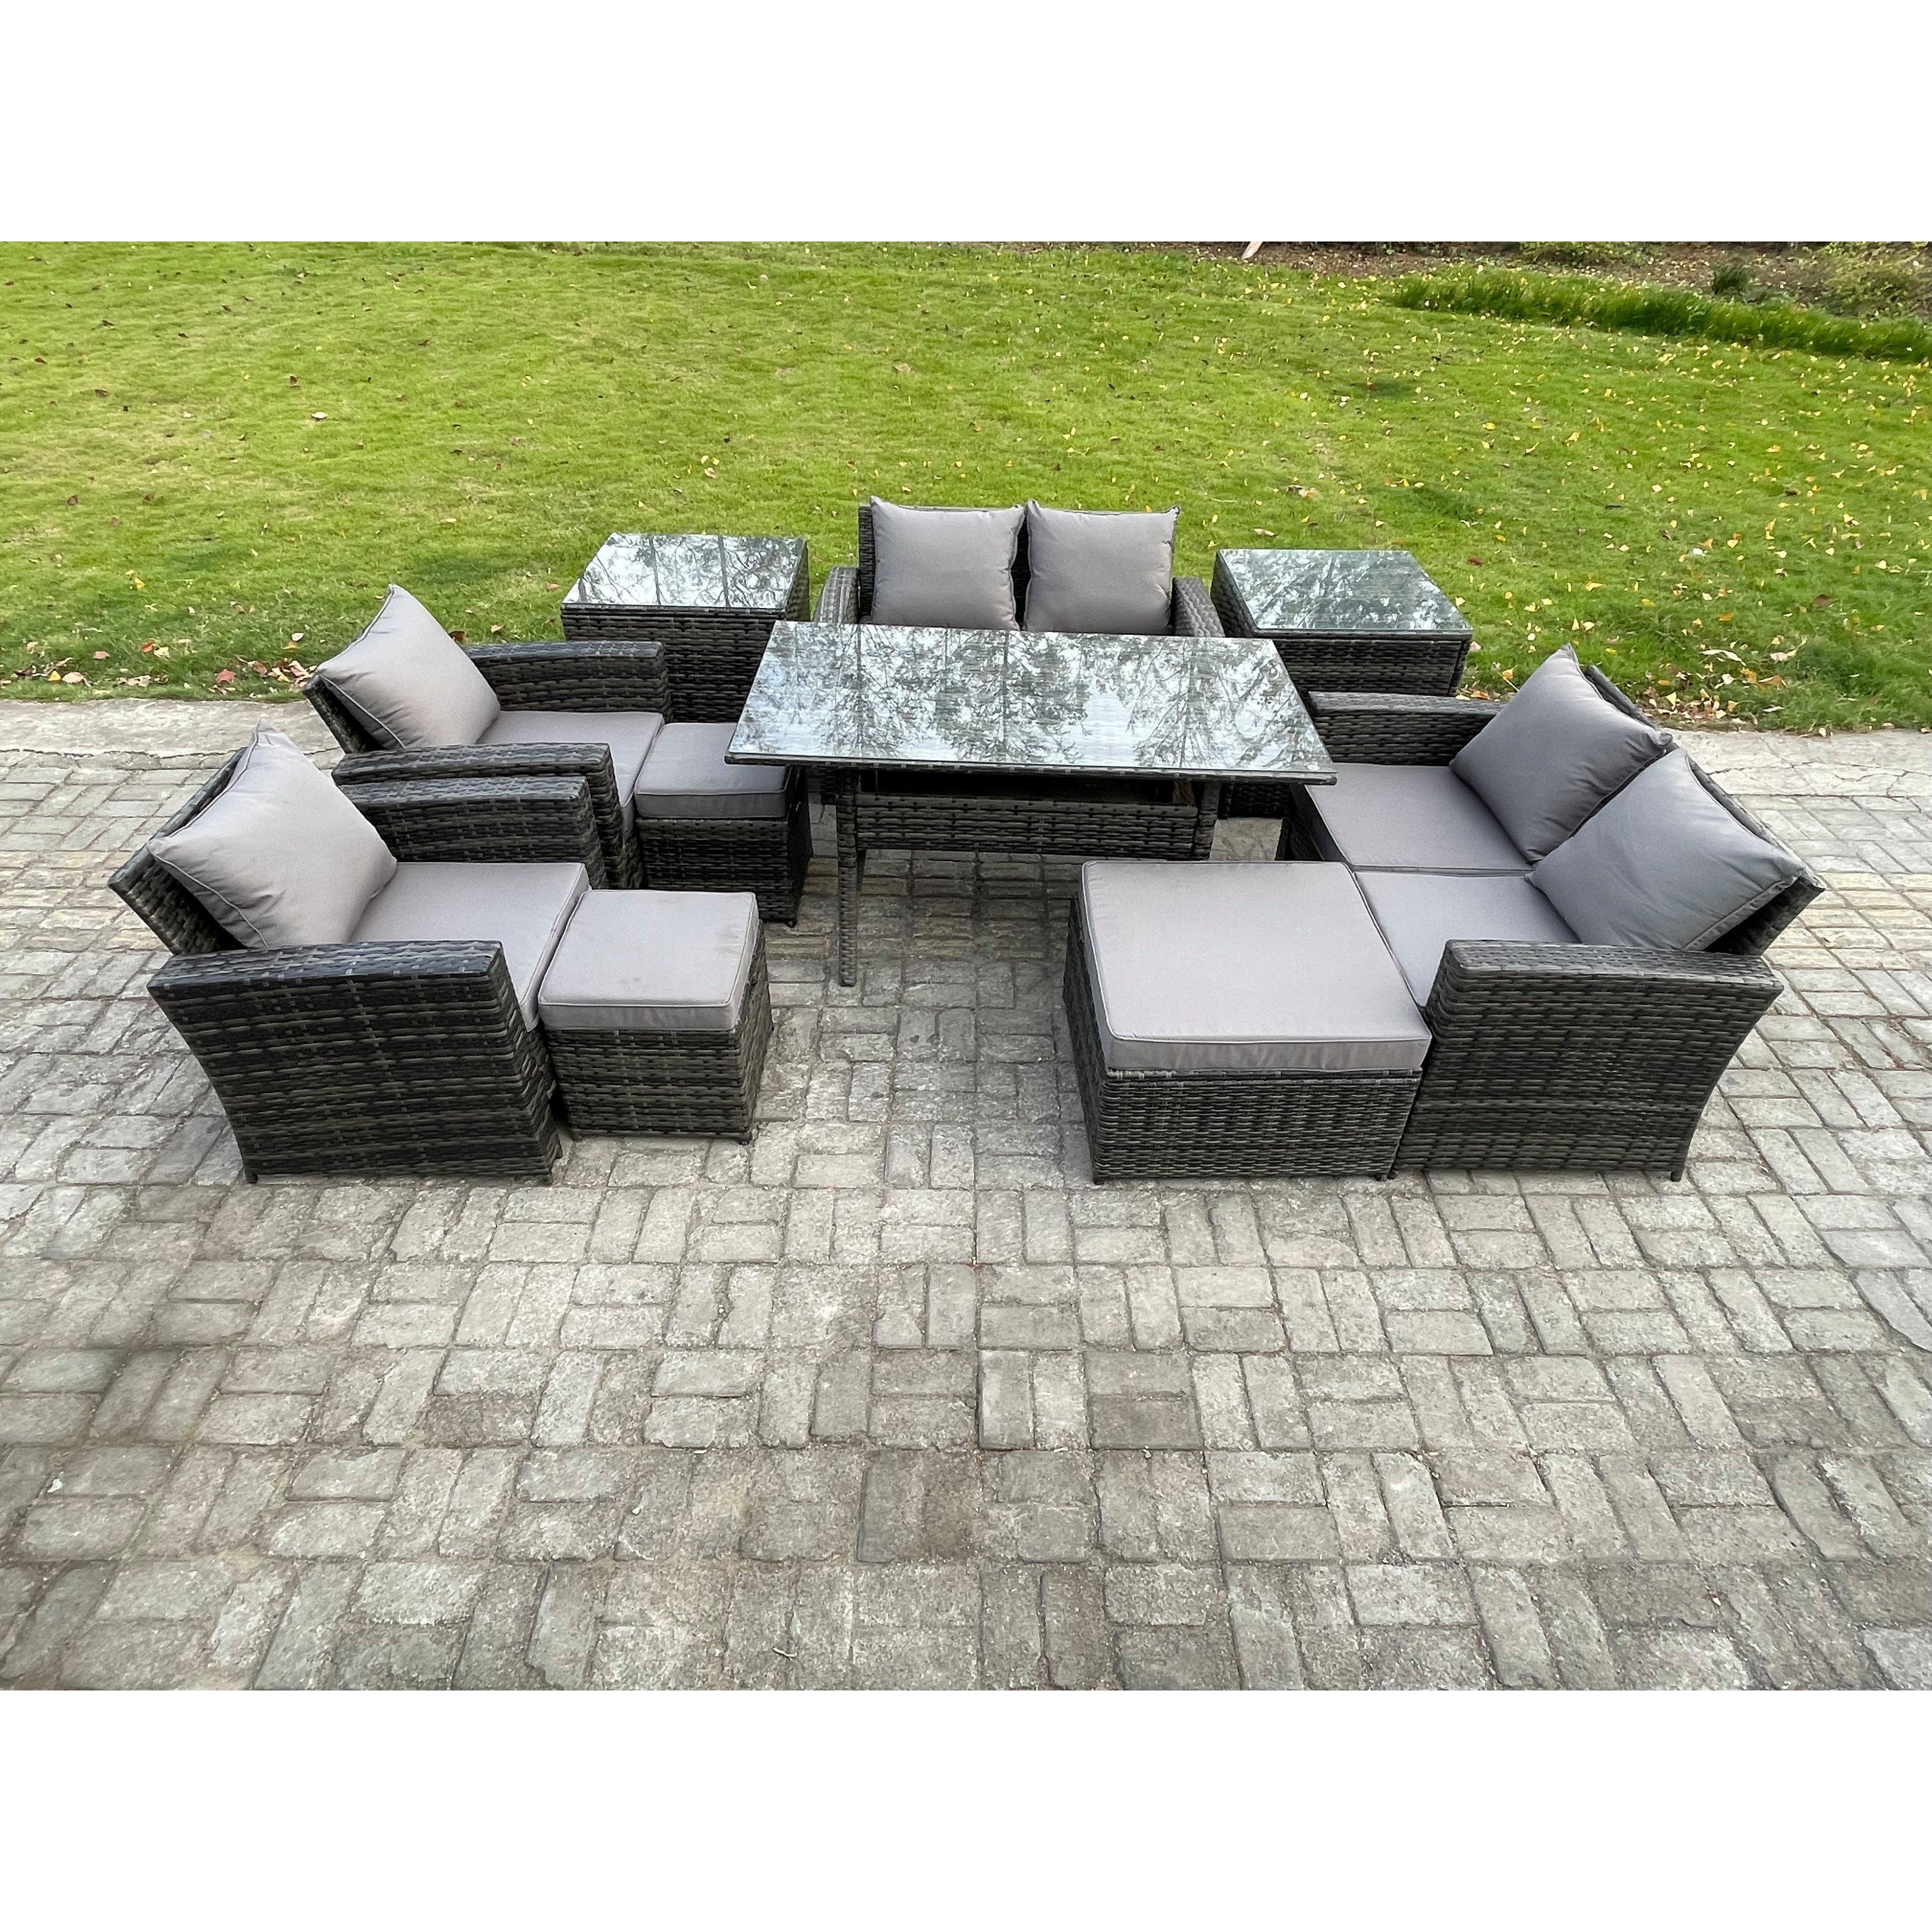 Garden Furniture Sets 10 Pieces Rattan Furniture Handmade Wicker Patio Sofa Set with 3 Footstools 2 Side Tables - image 1